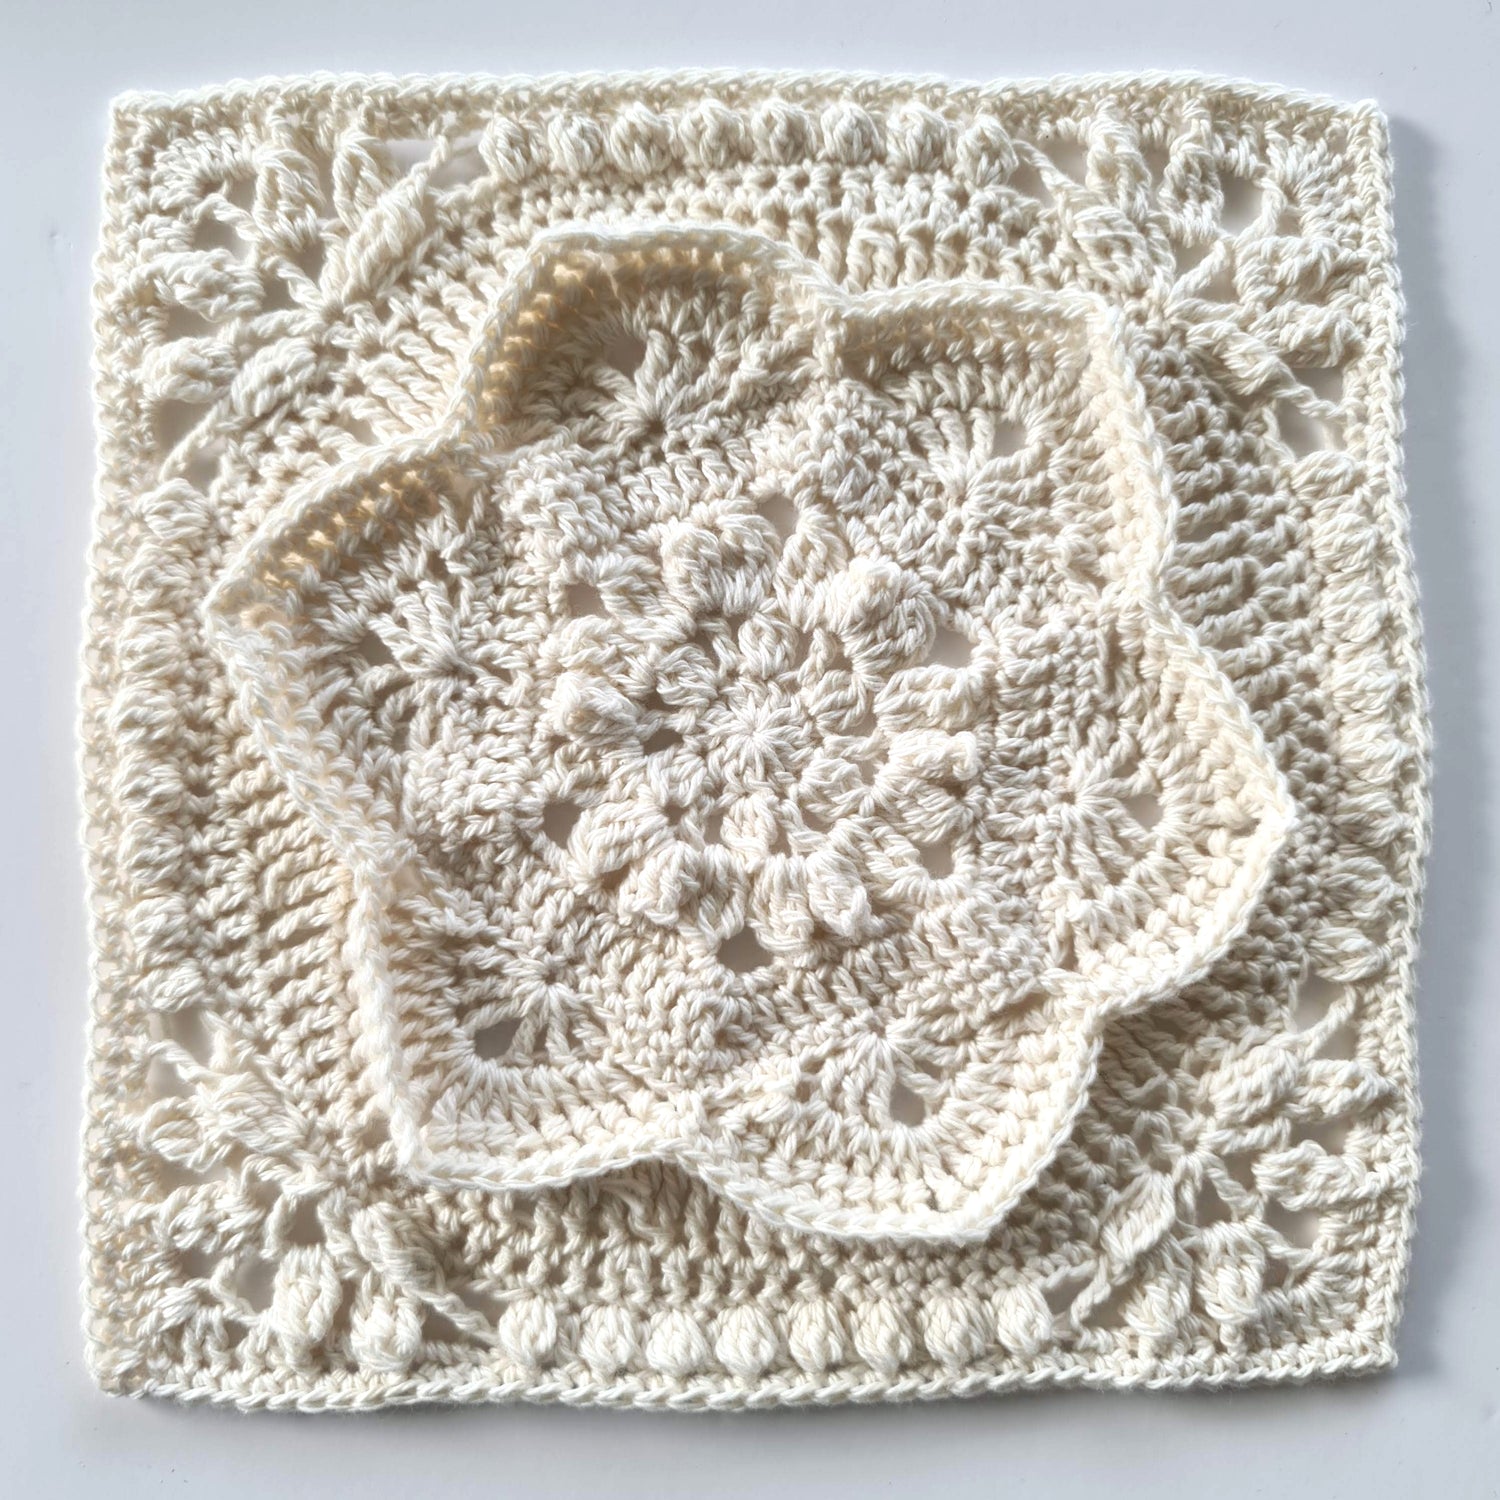 cream granny square of Asterales Crochet Granny Square Pattern by Shelley Husband